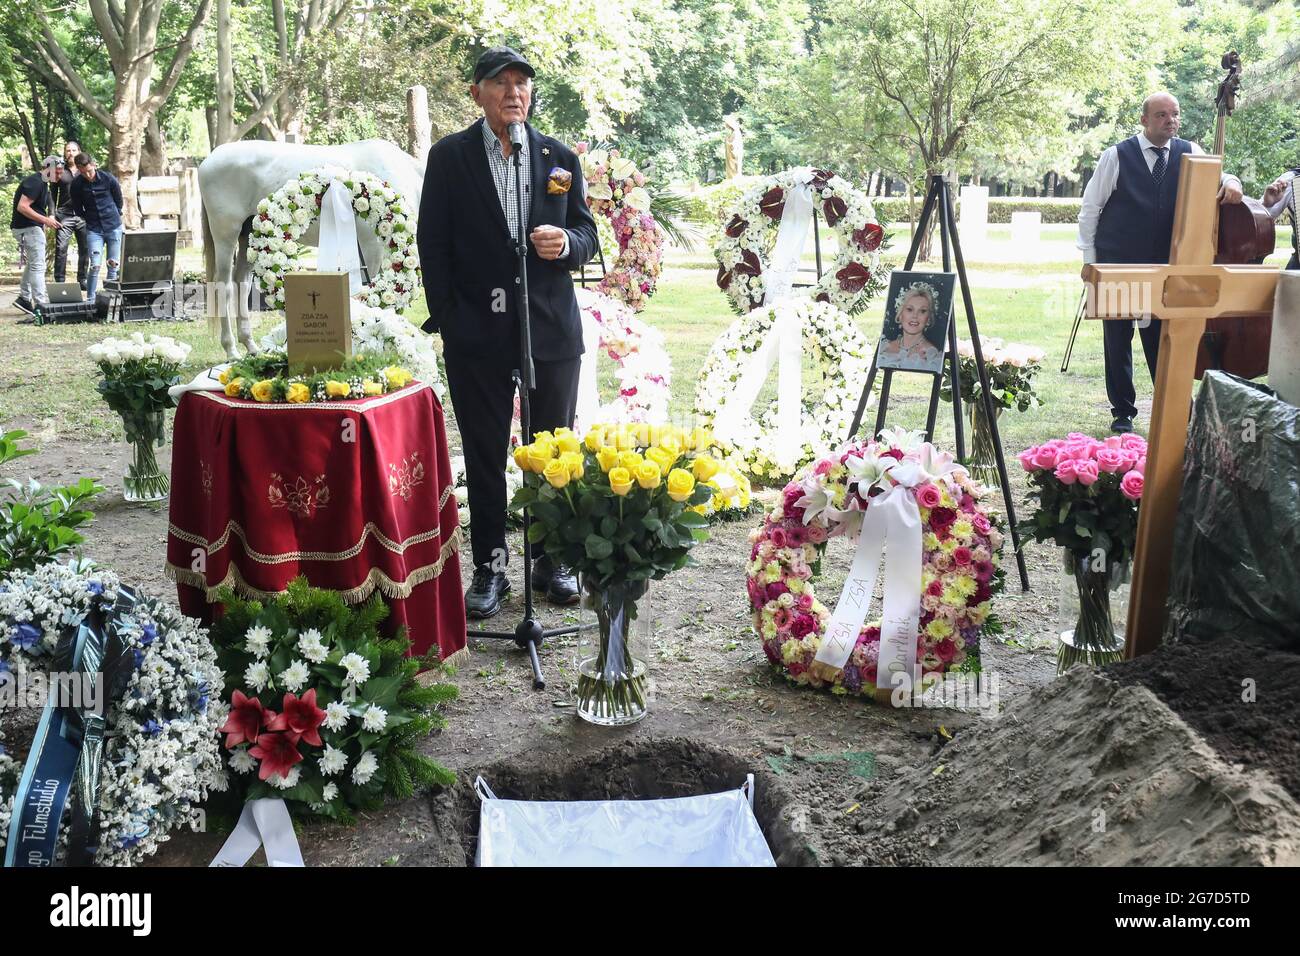 Budapest, Hungary. 13th July, 2021. Prince Frédéric von Anhalt, the last  husband of Zsa Zsa Gabor, speaks at the urn burial of the Hollywood diva at  the grave of honour in Kerepesch